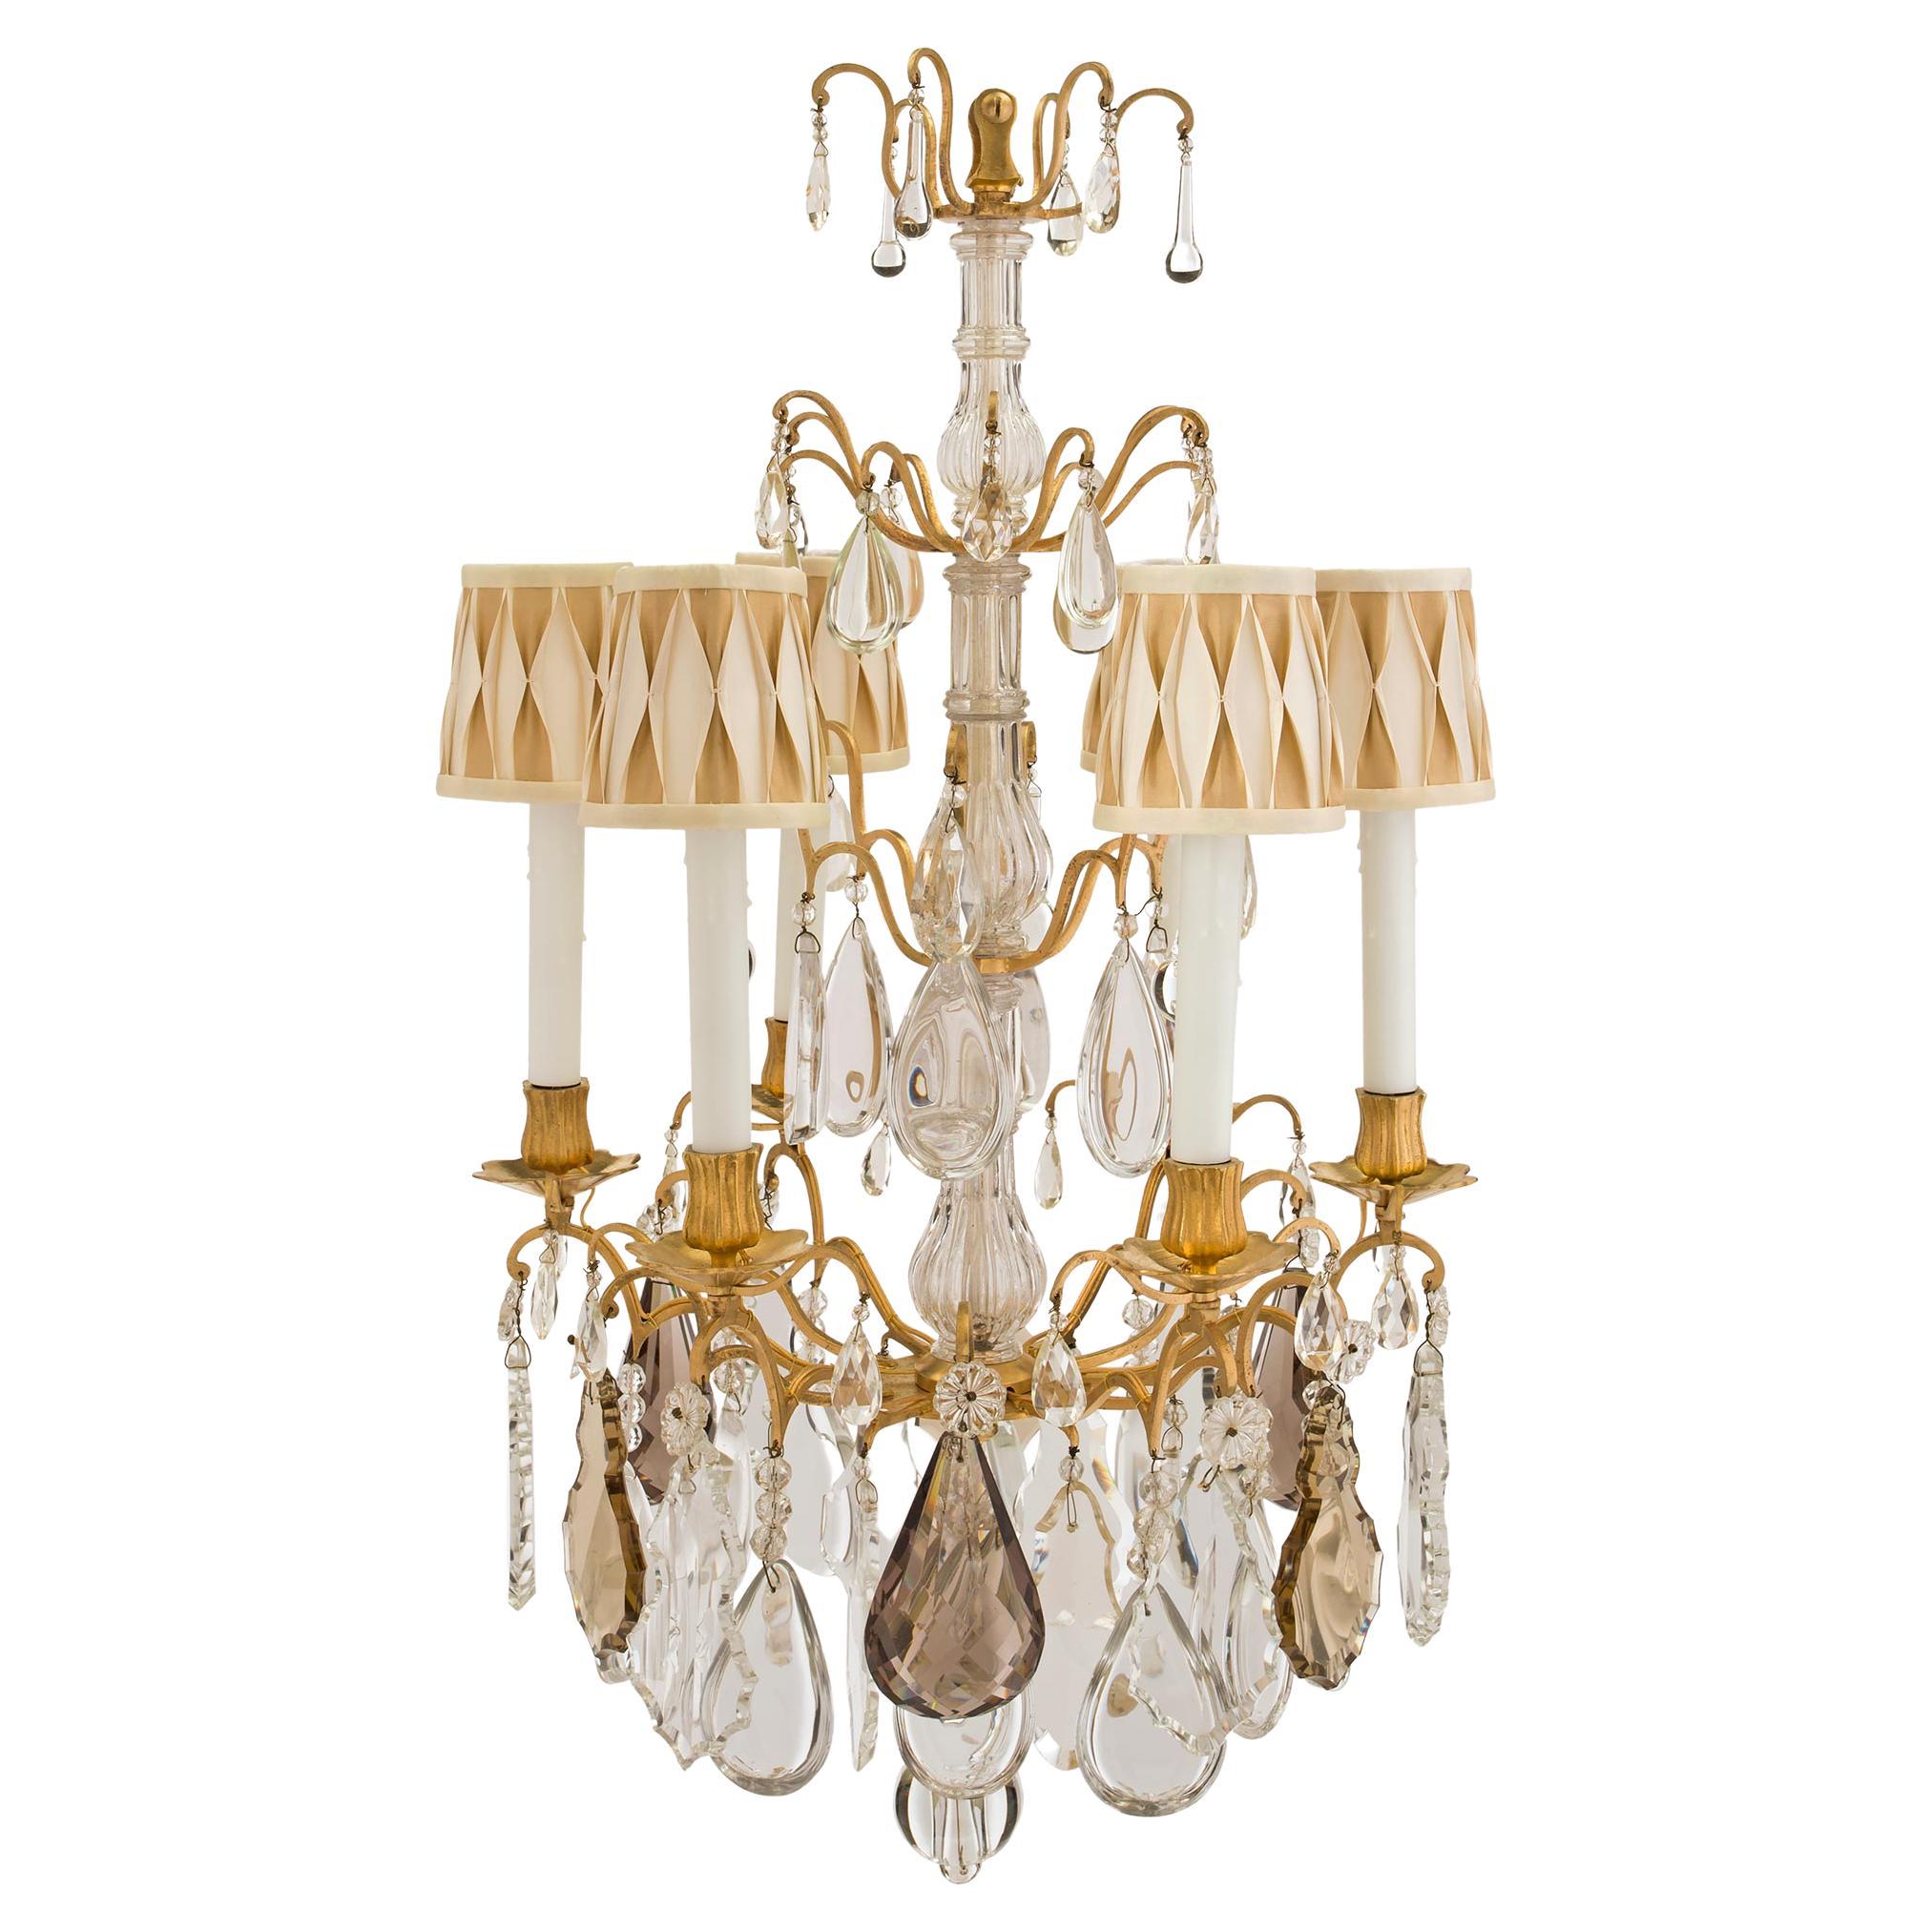 French Mid-19th Century Louis XV Style Baccarat Crystal and Ormolu Chandelier For Sale